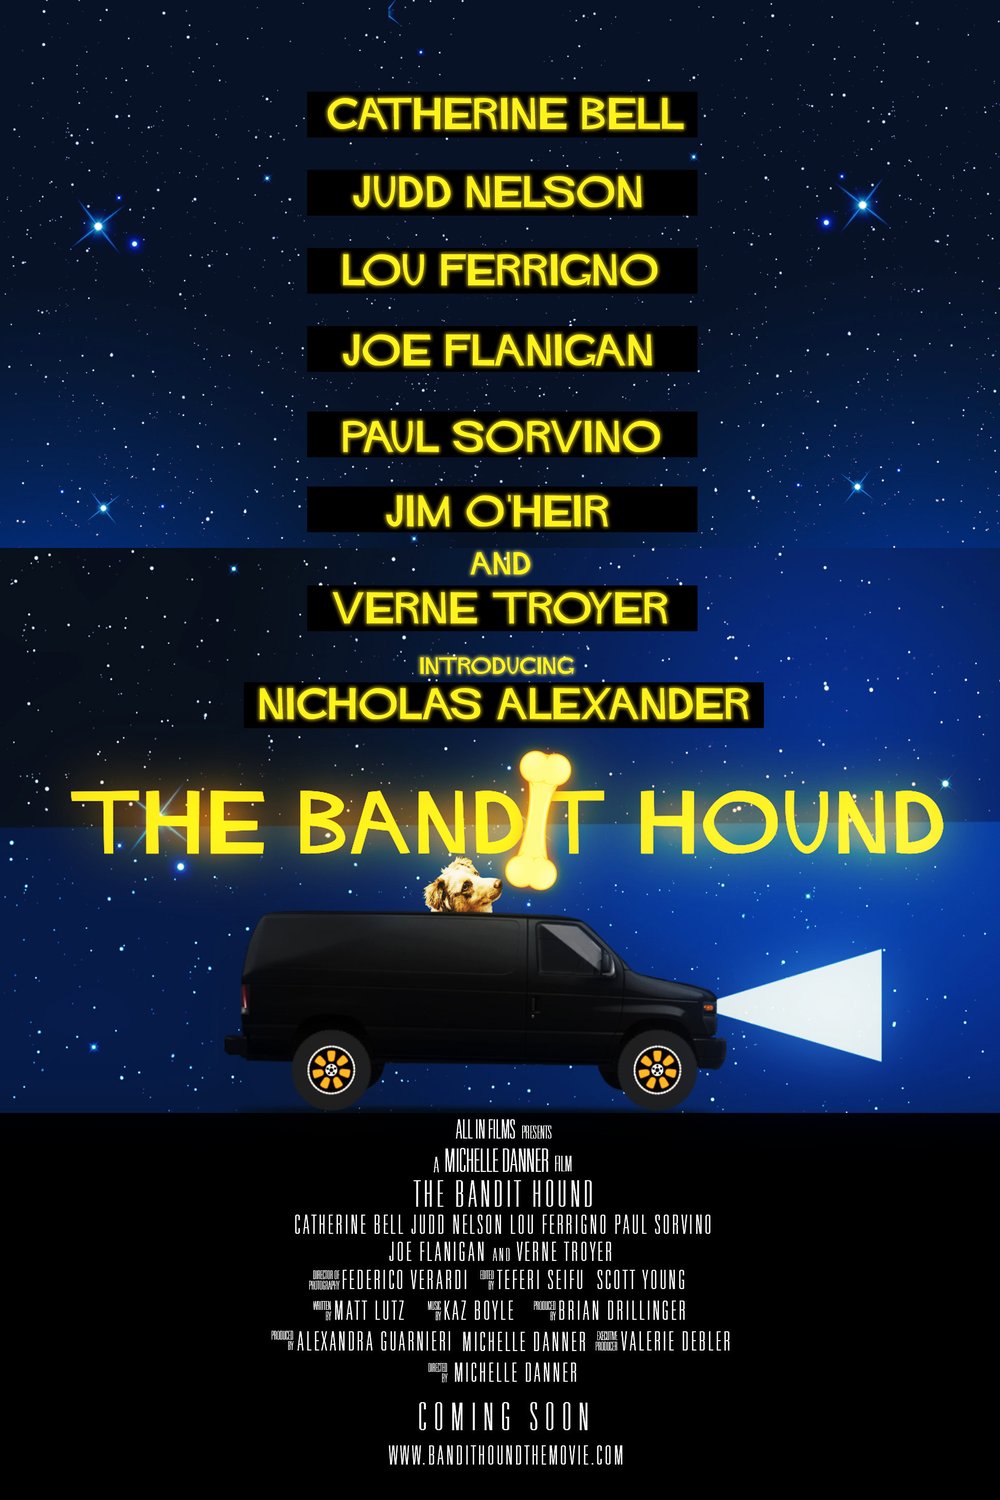 Poster of the movie The Bandit Hound